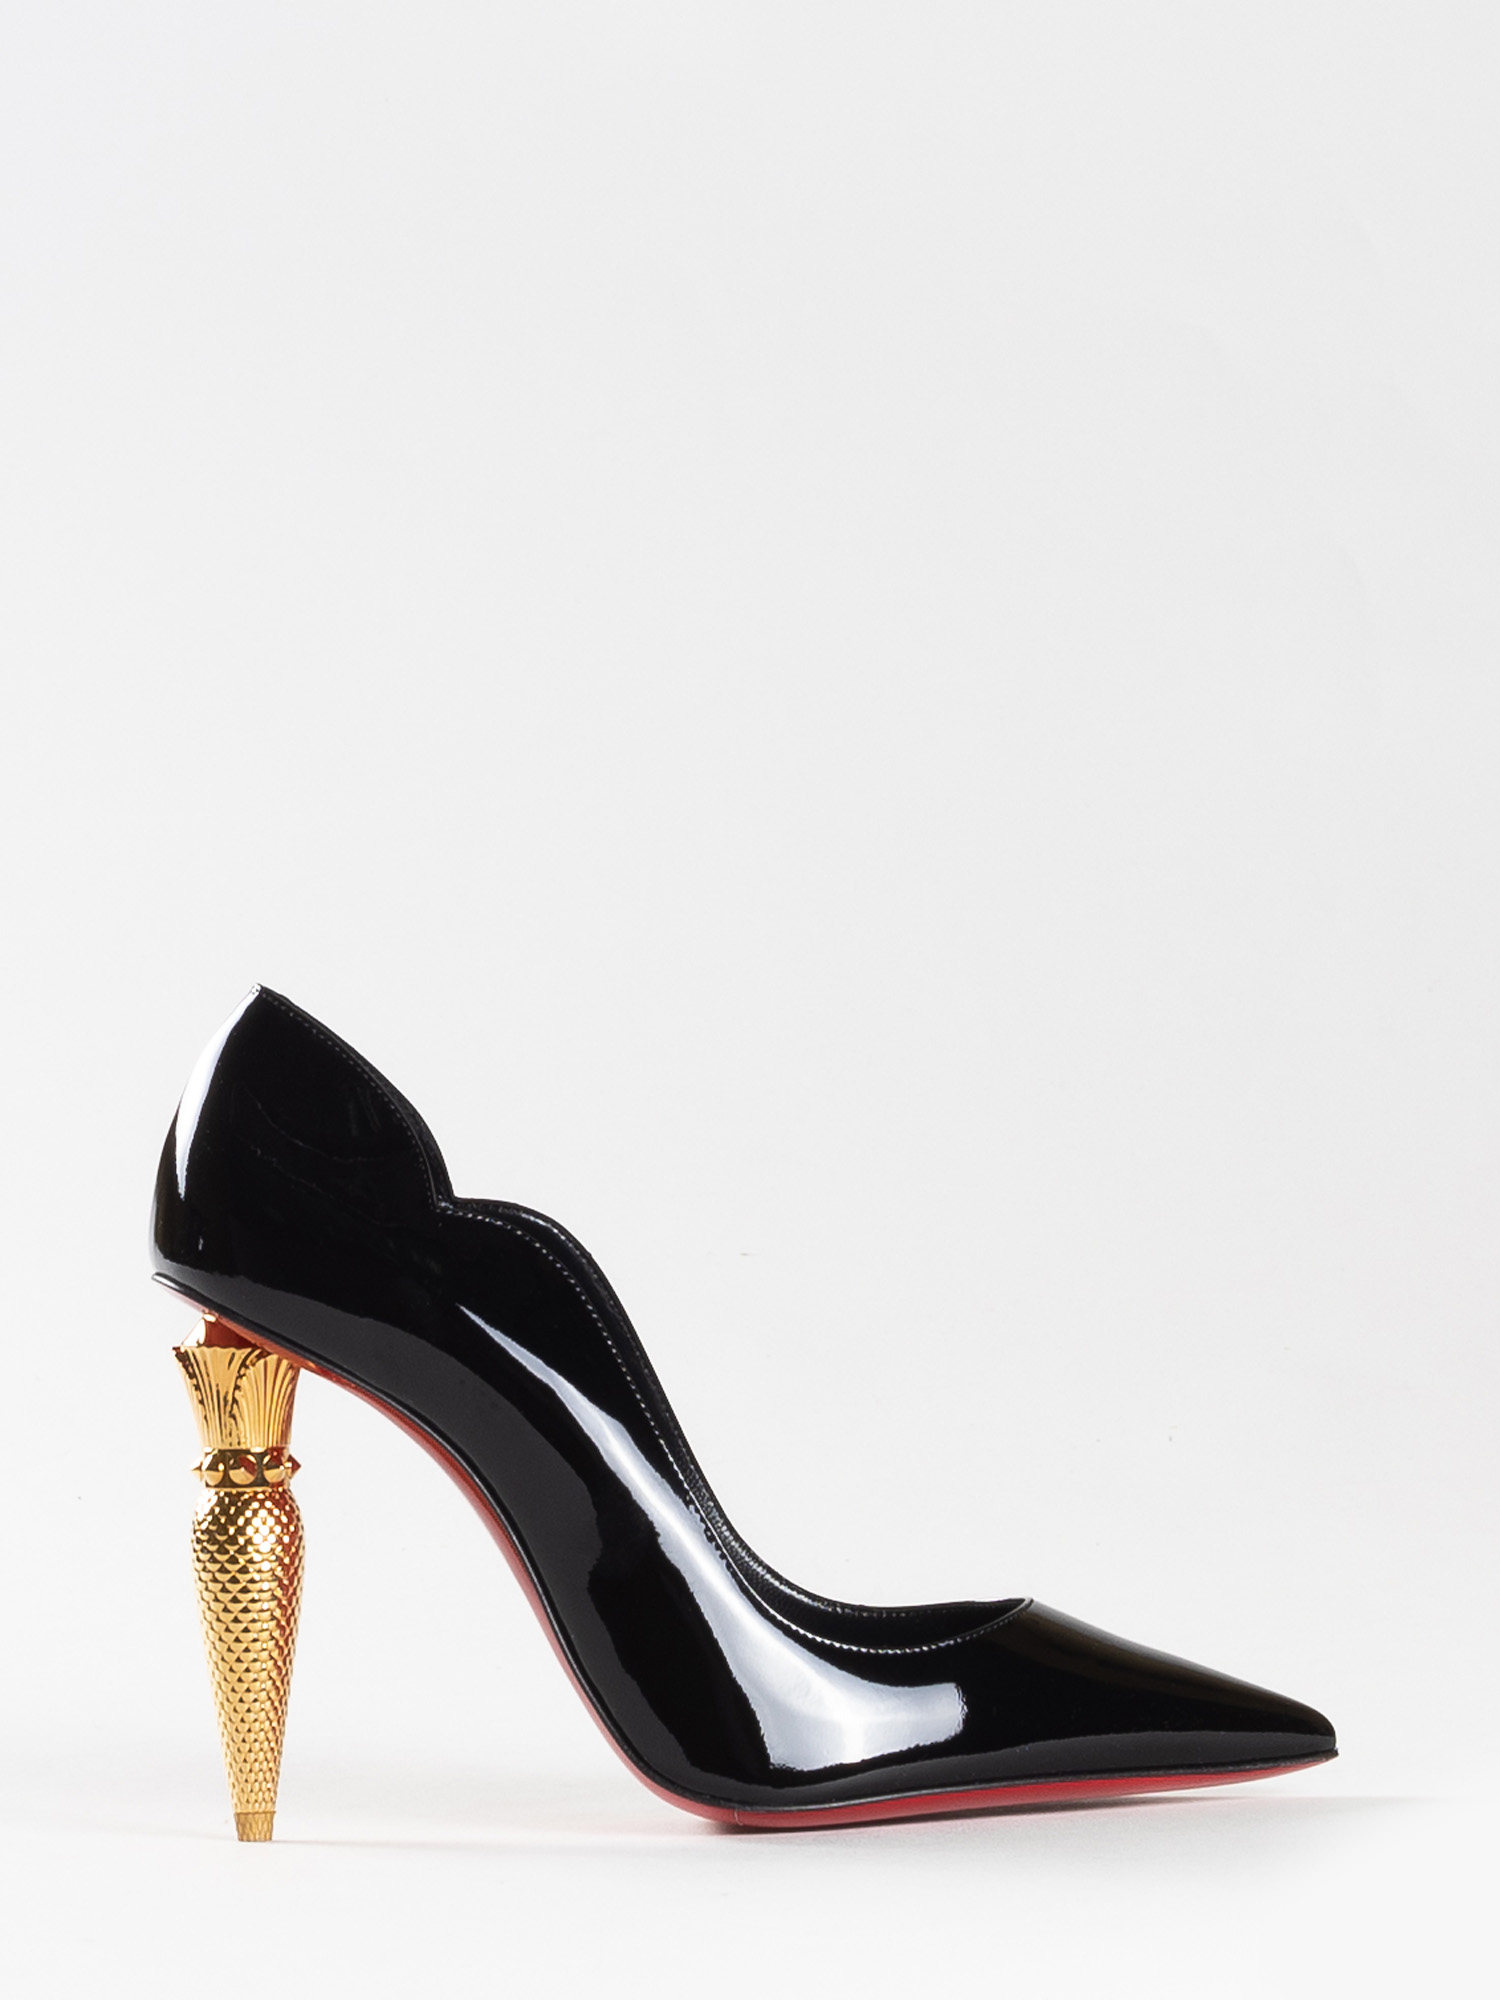 PATENT LEATHER SHOES - CHRISTIAN LOUBOUTIN